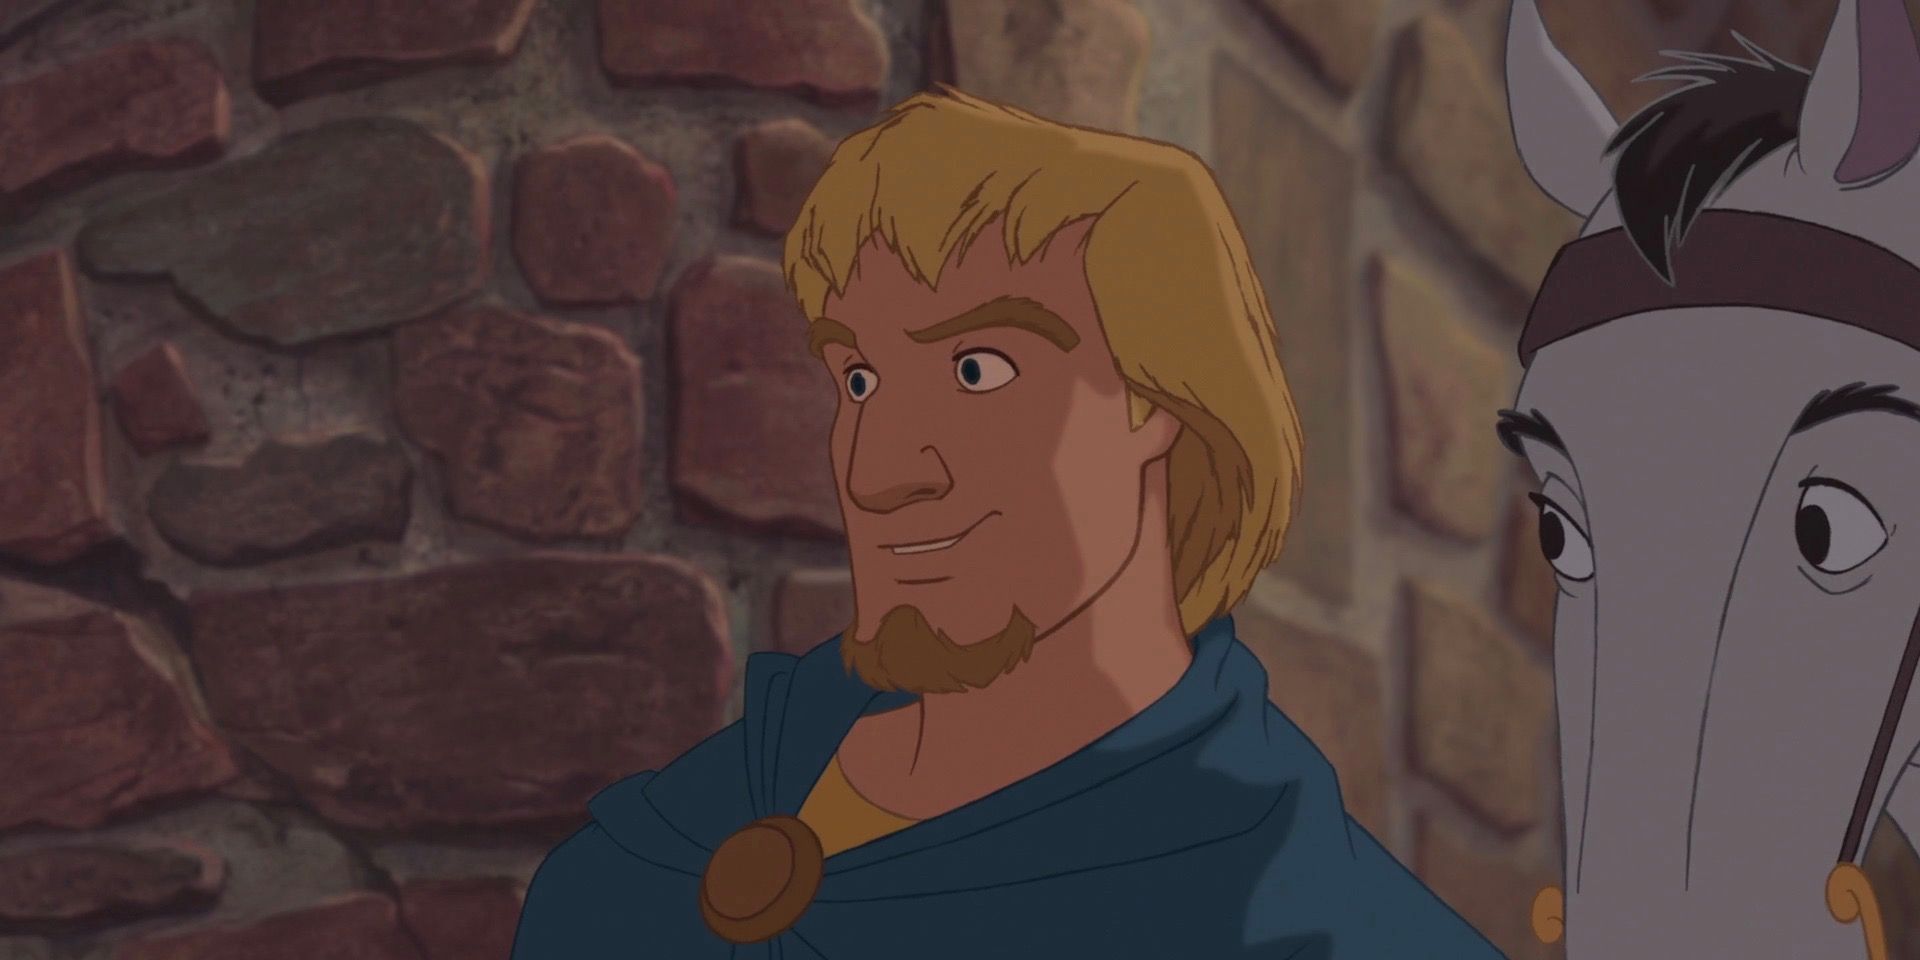 Phoebus from The Hunchback of Notre Dame